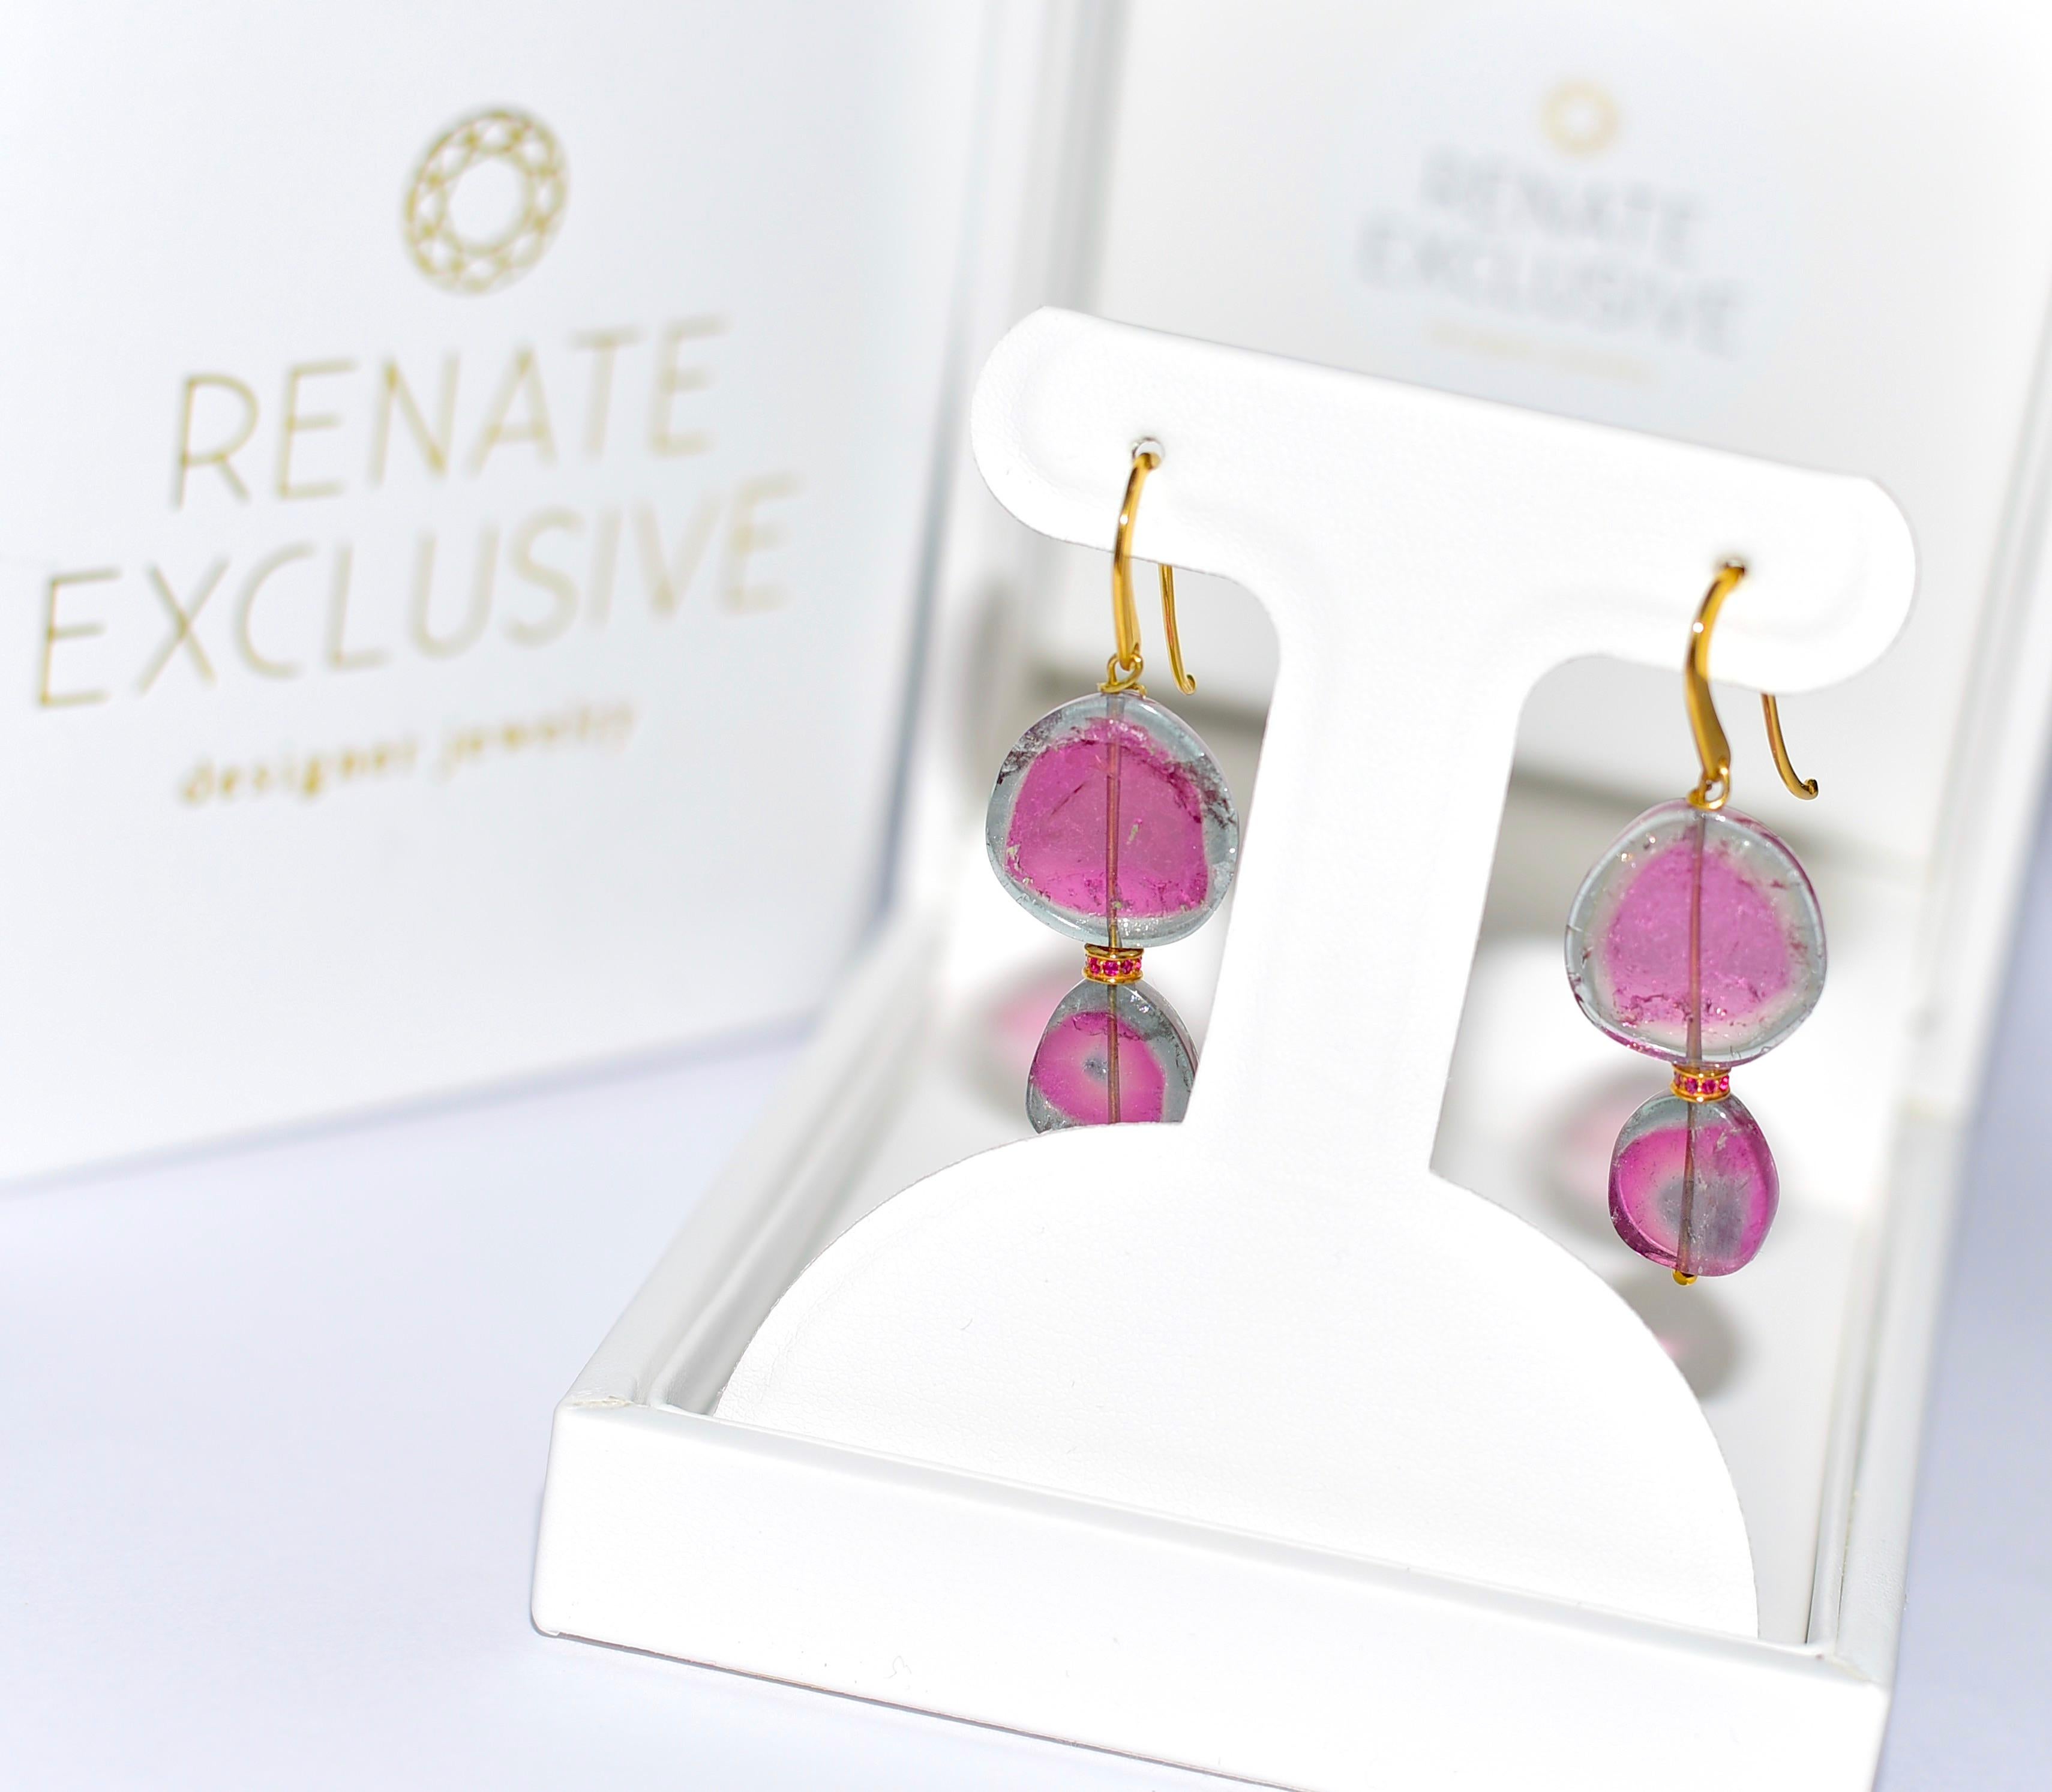 Bohemian Luxury! Rare Watermelon Tourmaline slice bead ( 18.35CT) and smaller (12.35CT) Fine Pink Blue Watermelon Tourmaline Slice Bead with elegant Ruby Eternity spacer earrings are GORGEOUS and elegant accessories for your everyday wear!

Total